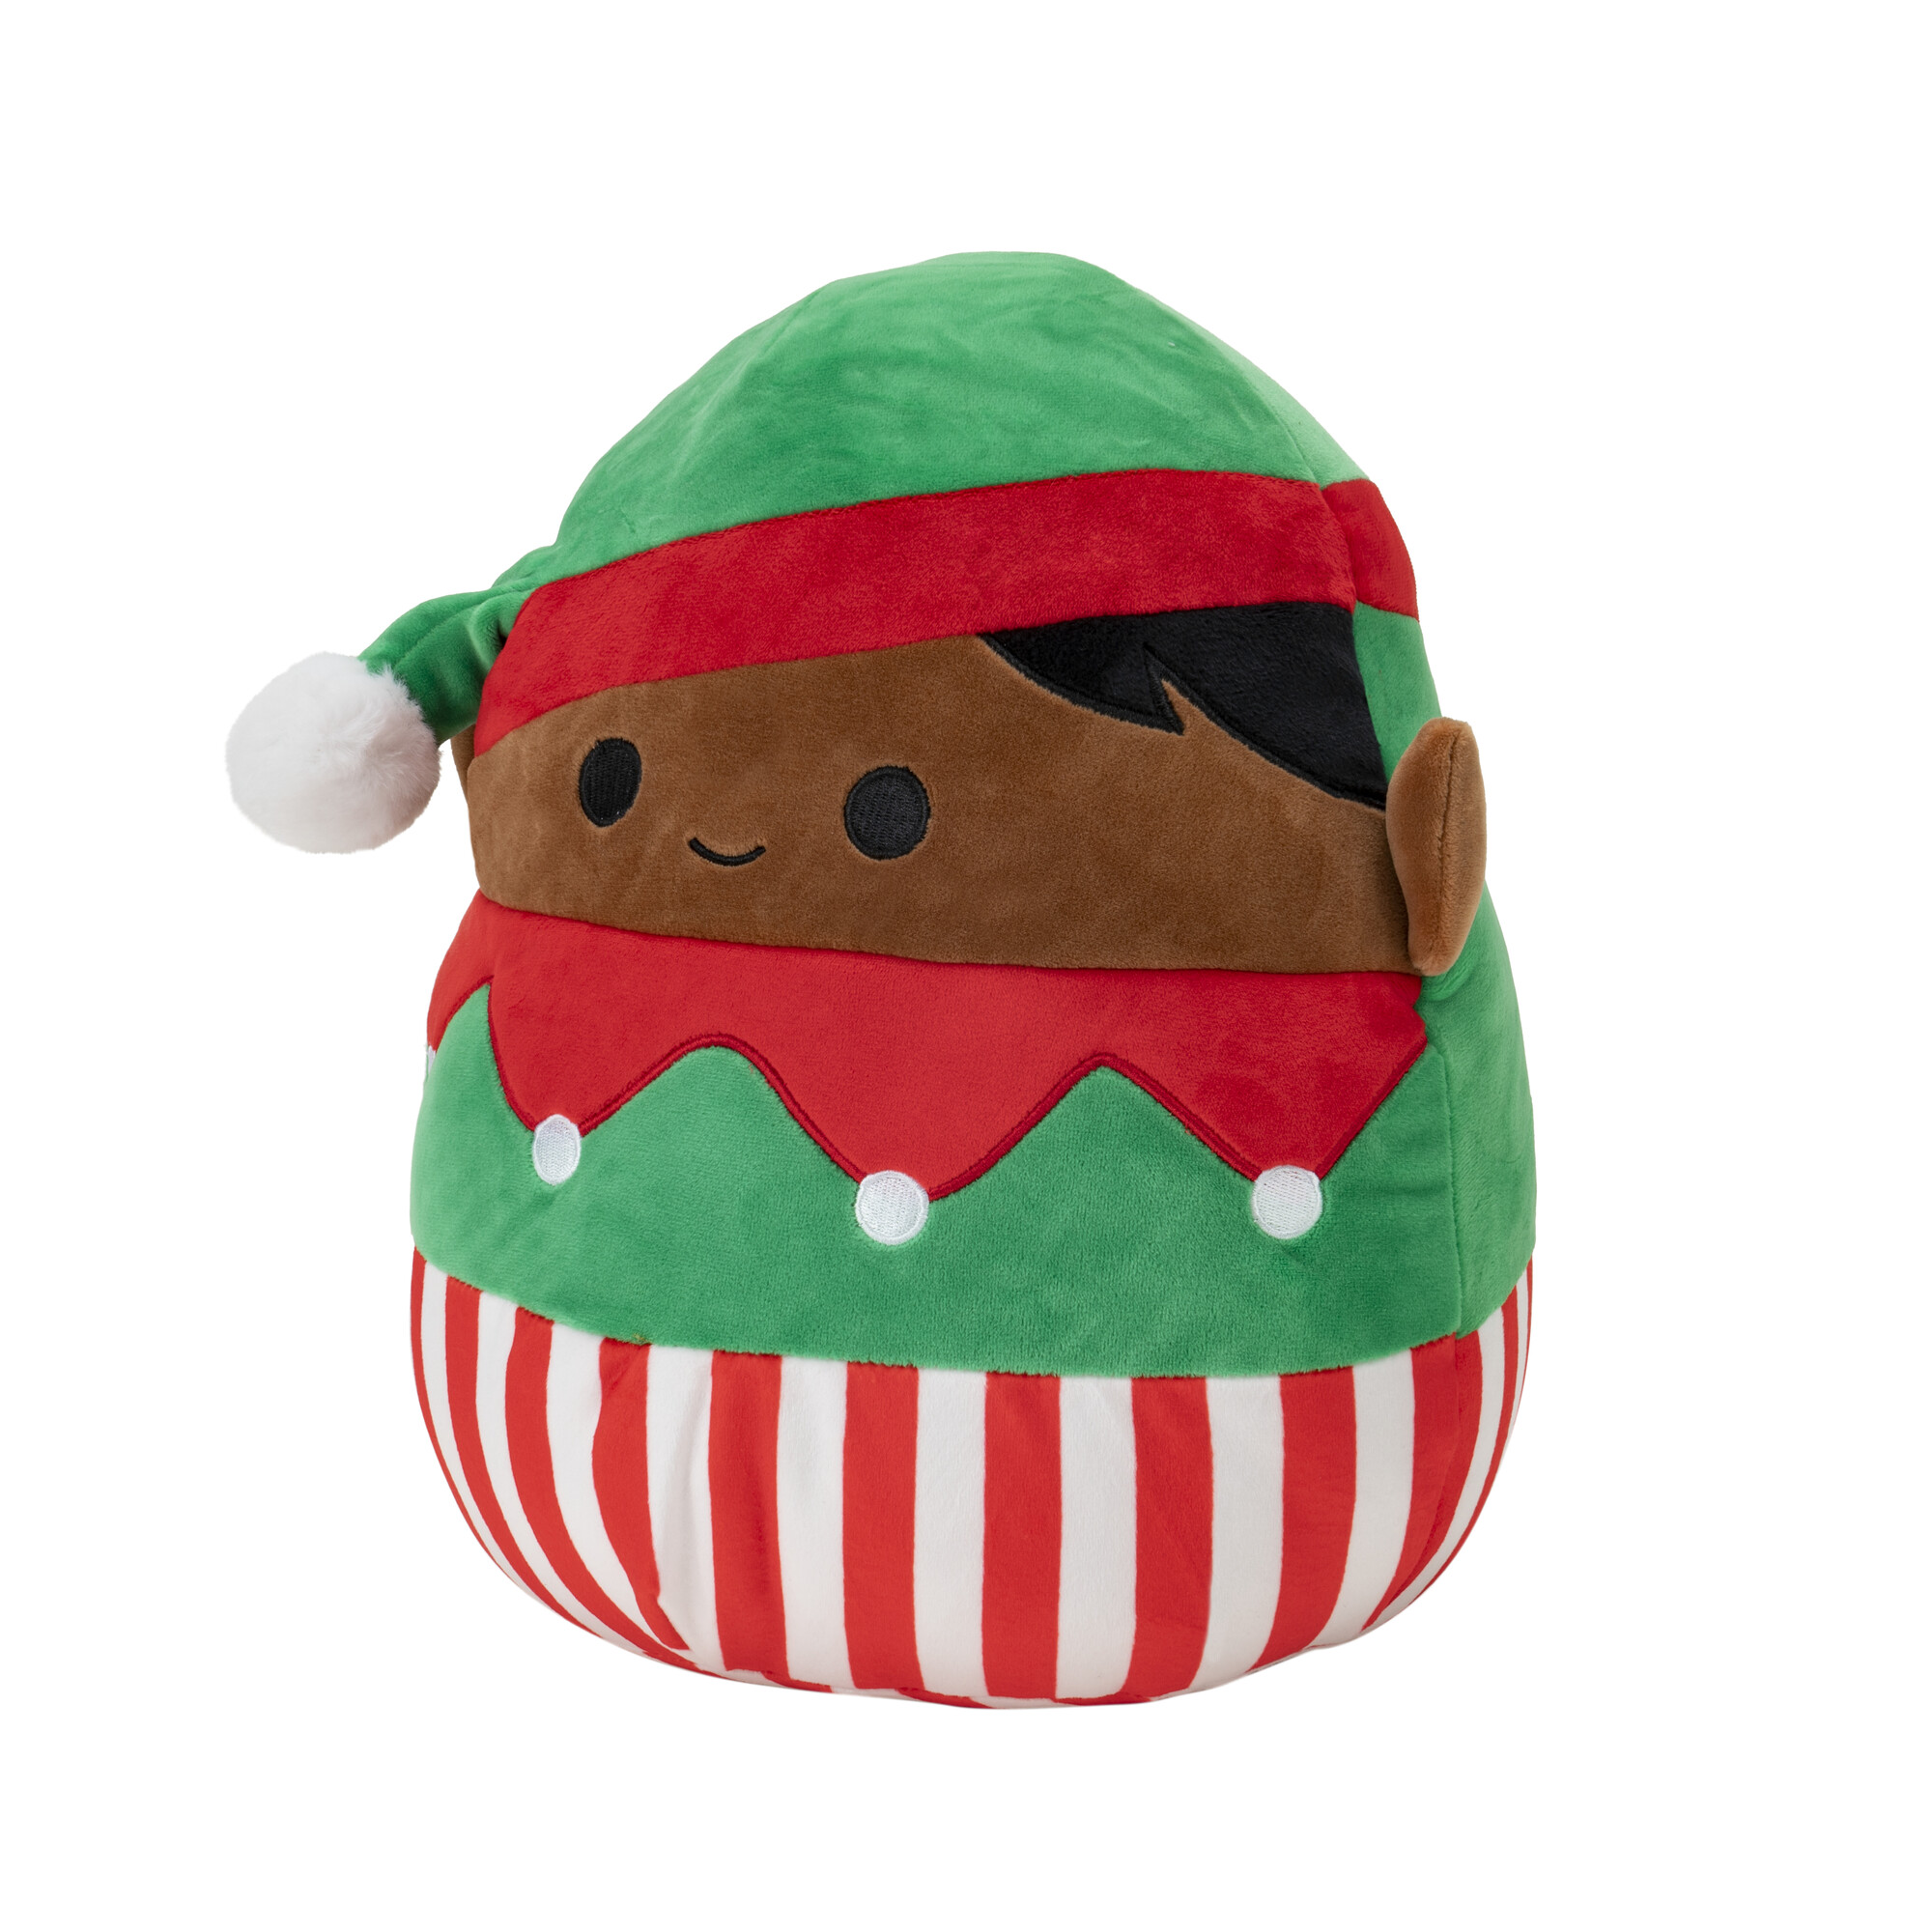 Squishmallows 12 inch Ezrah the Red and Green Elf Boy - Child's Ultra Soft Stuffed Plush Toy - image 4 of 7